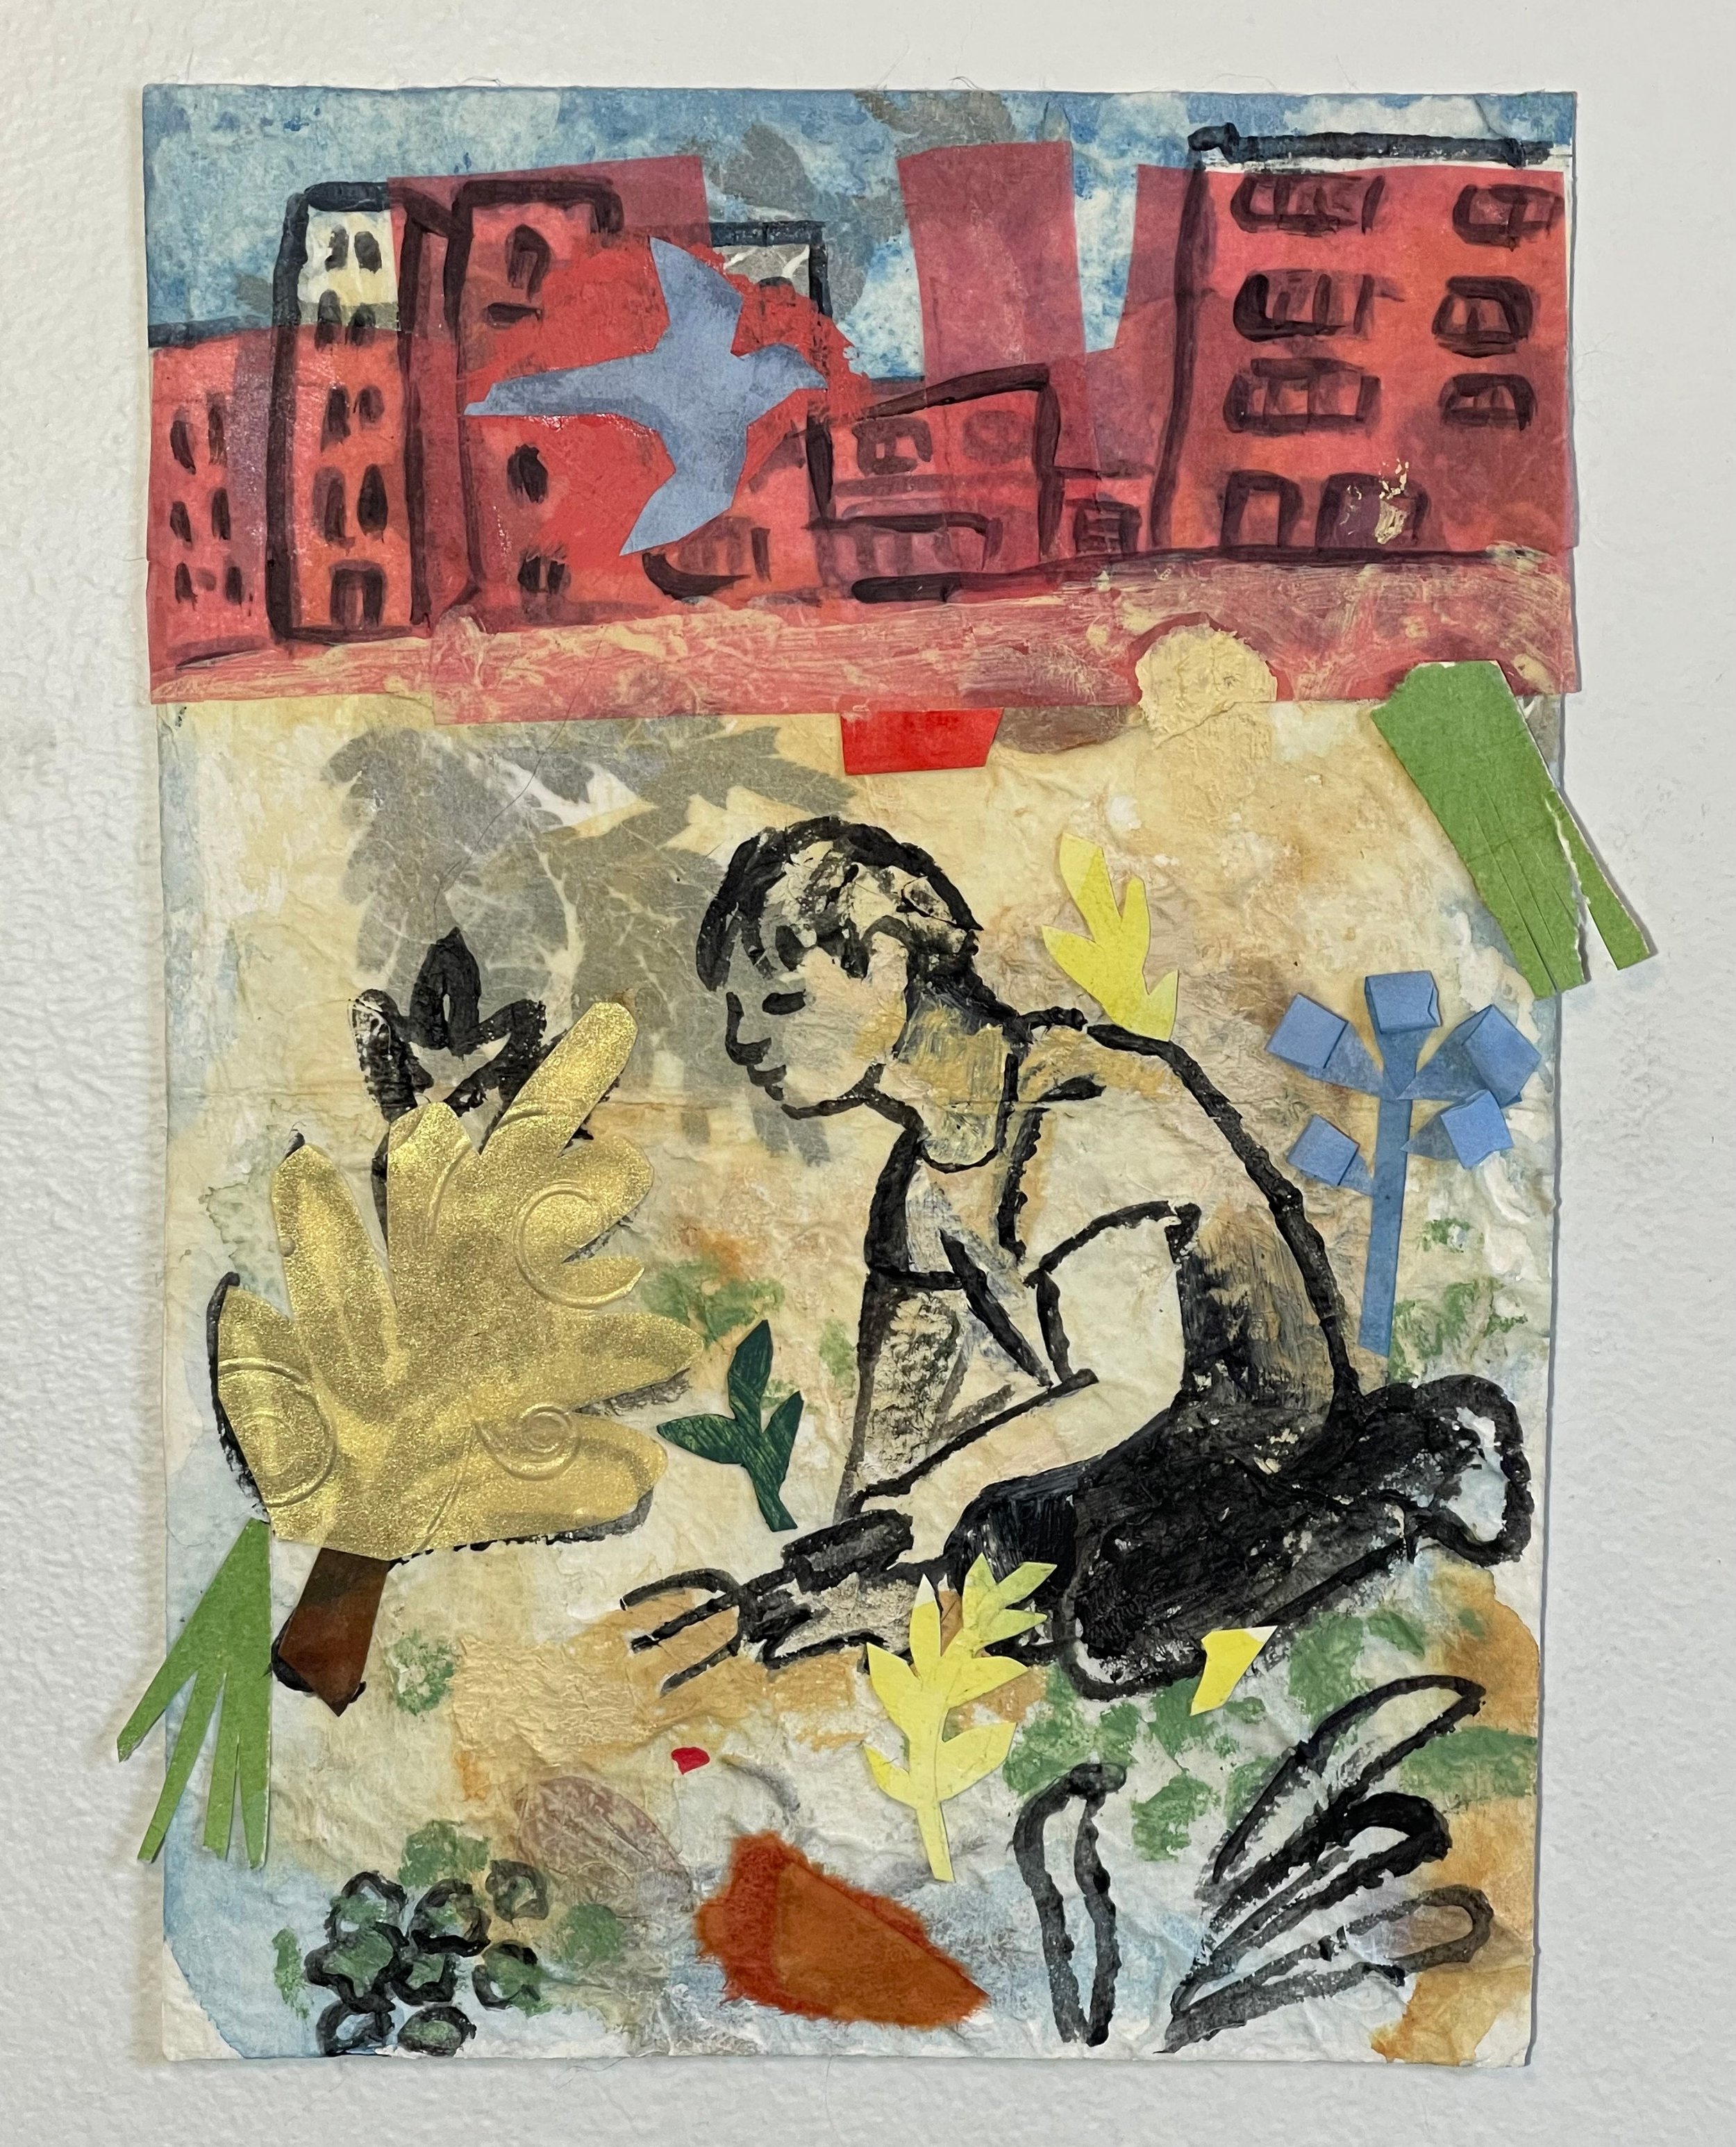  “City Roots 5 (Boy Gardening)”, 9.75”h x 7.5”w, Acrylic and collage on paper with pressed plants   